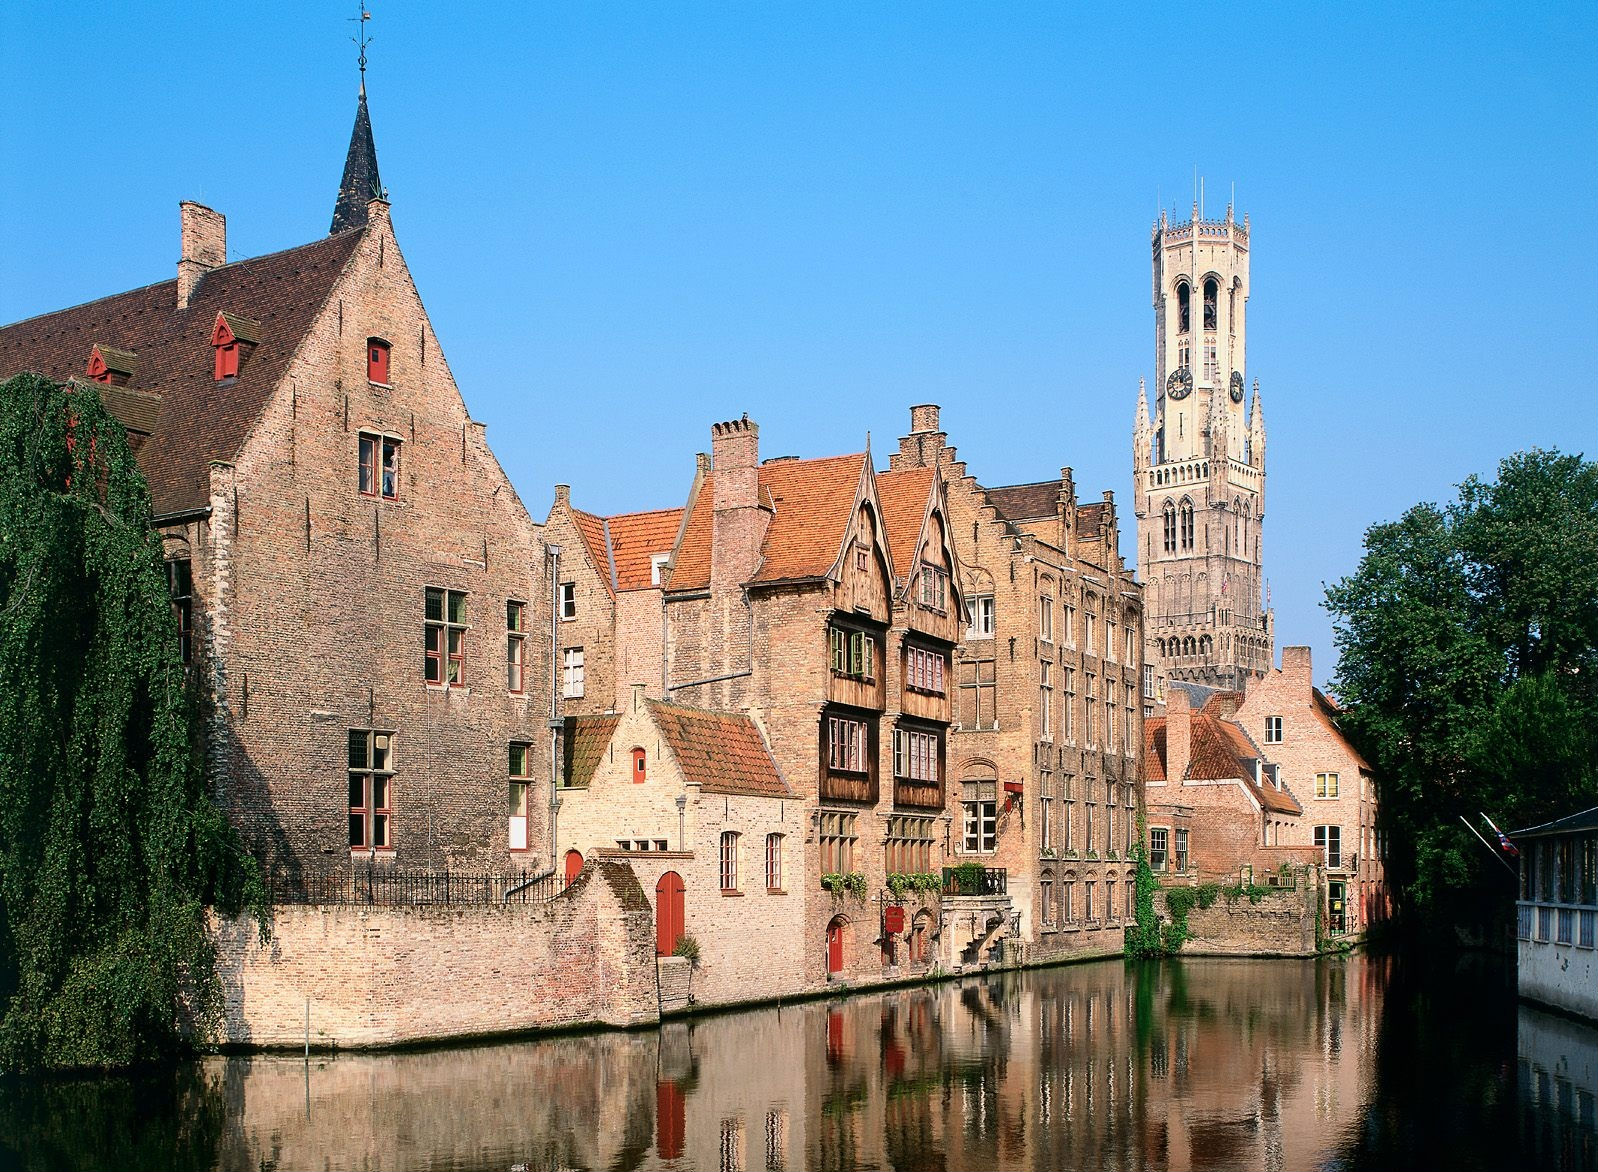 Brugge cityscape in Belgium with beautiful architecture.